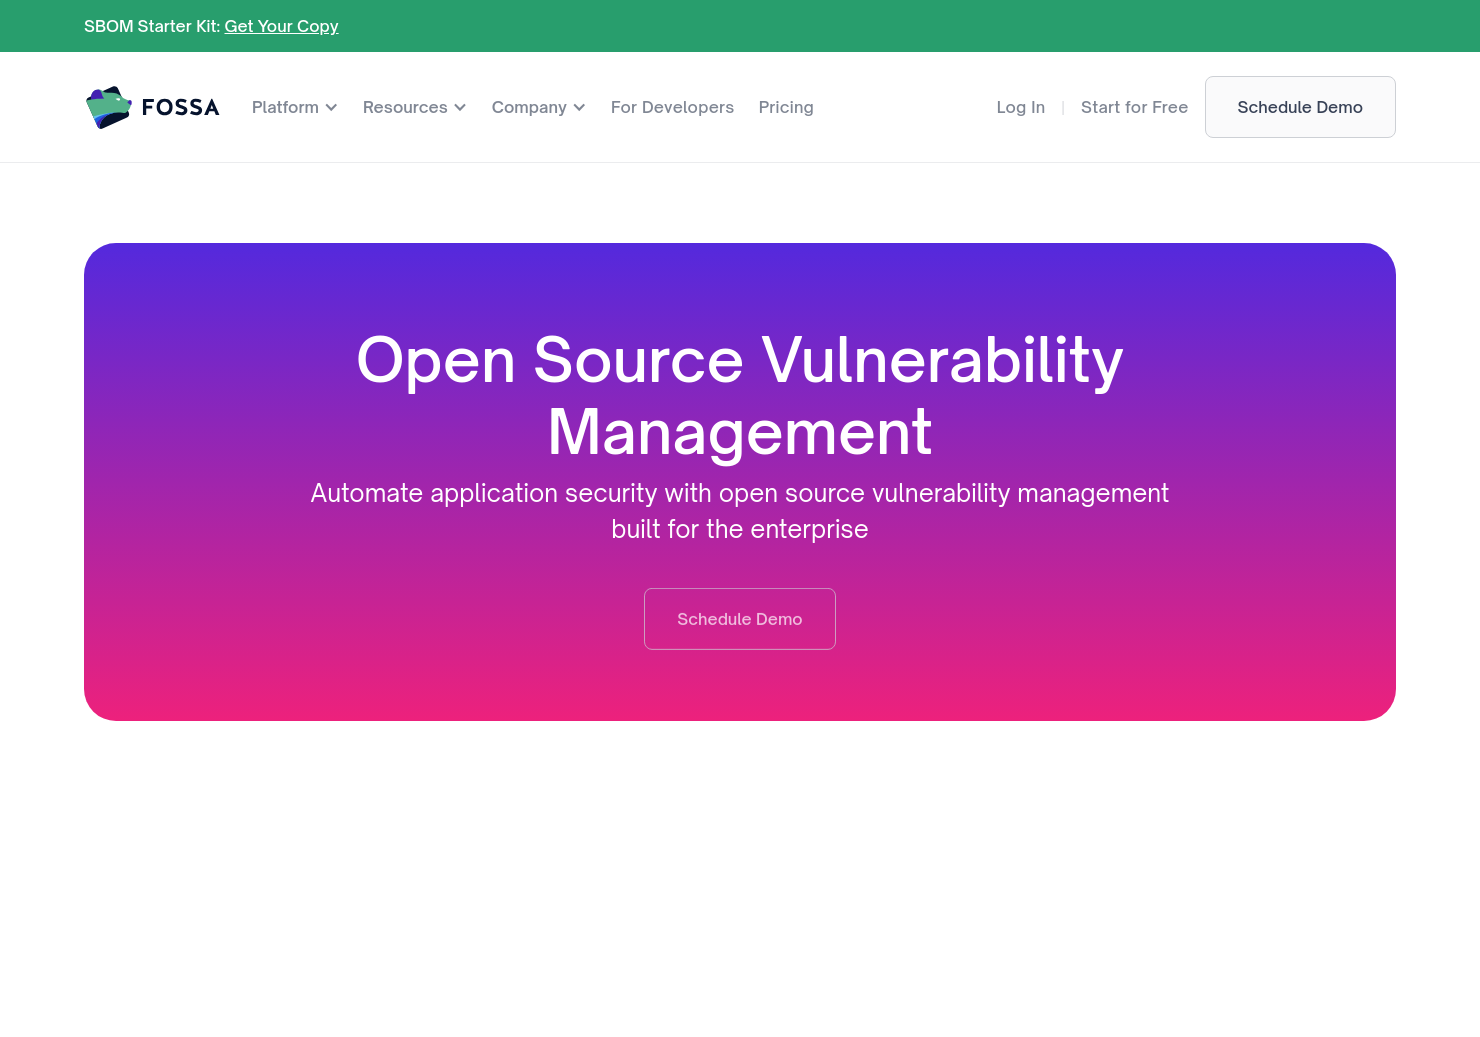 Open Source Security Management by FOSSA